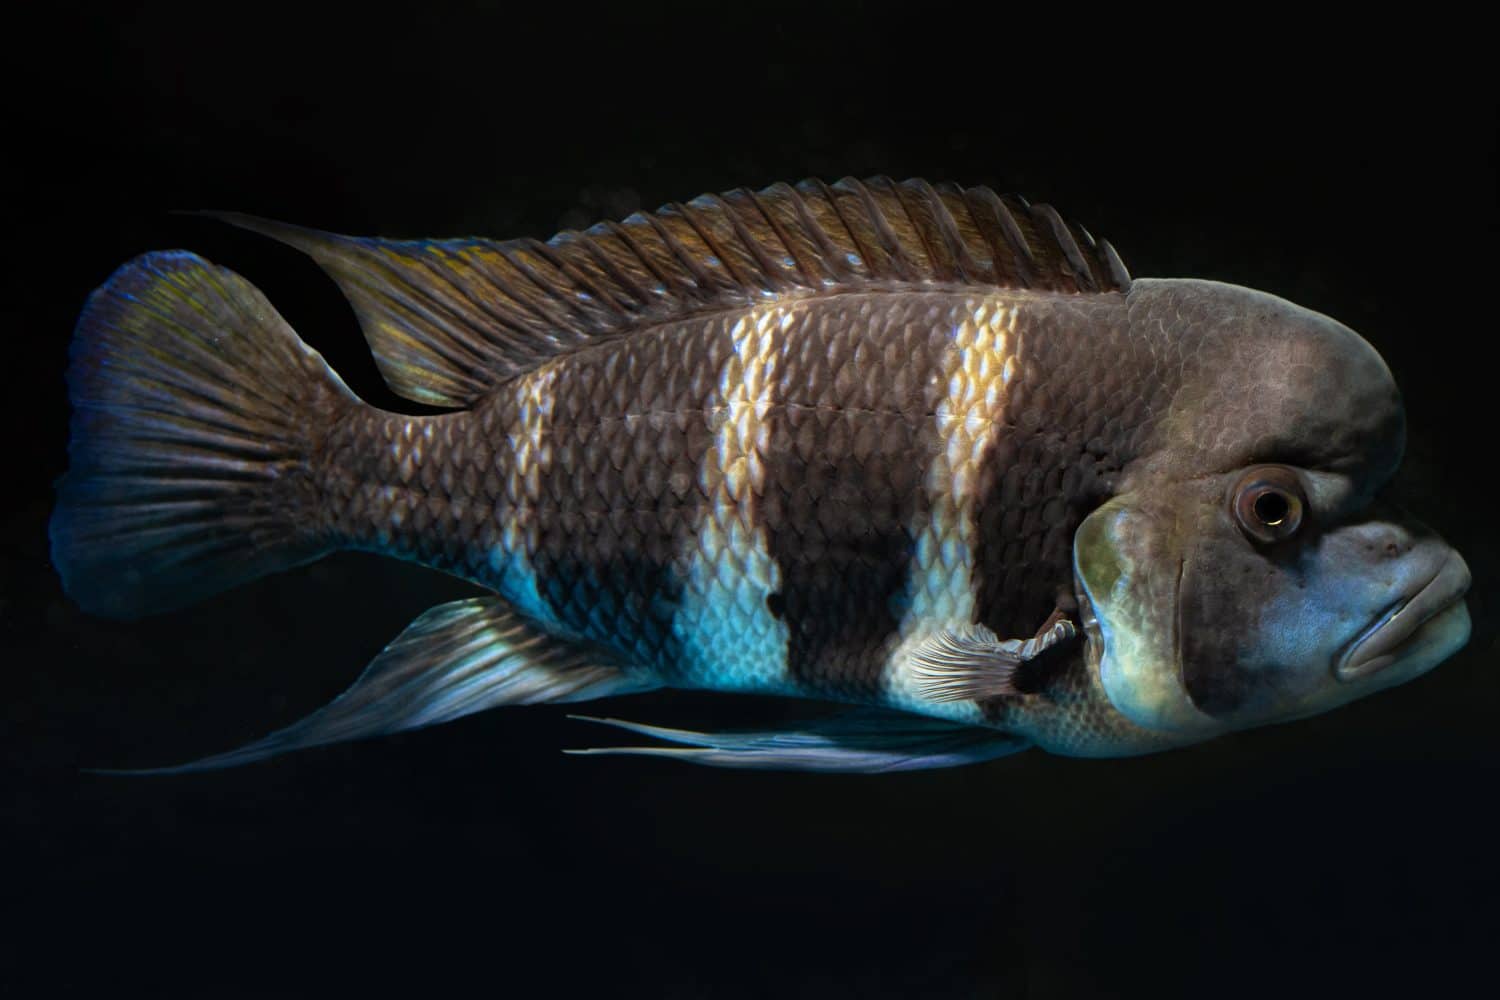 front cichlid wild, aggressive dominant male, popular and hardy freshwater fish, endemic of lake Tanganyika in low light fish tank of a pet shop